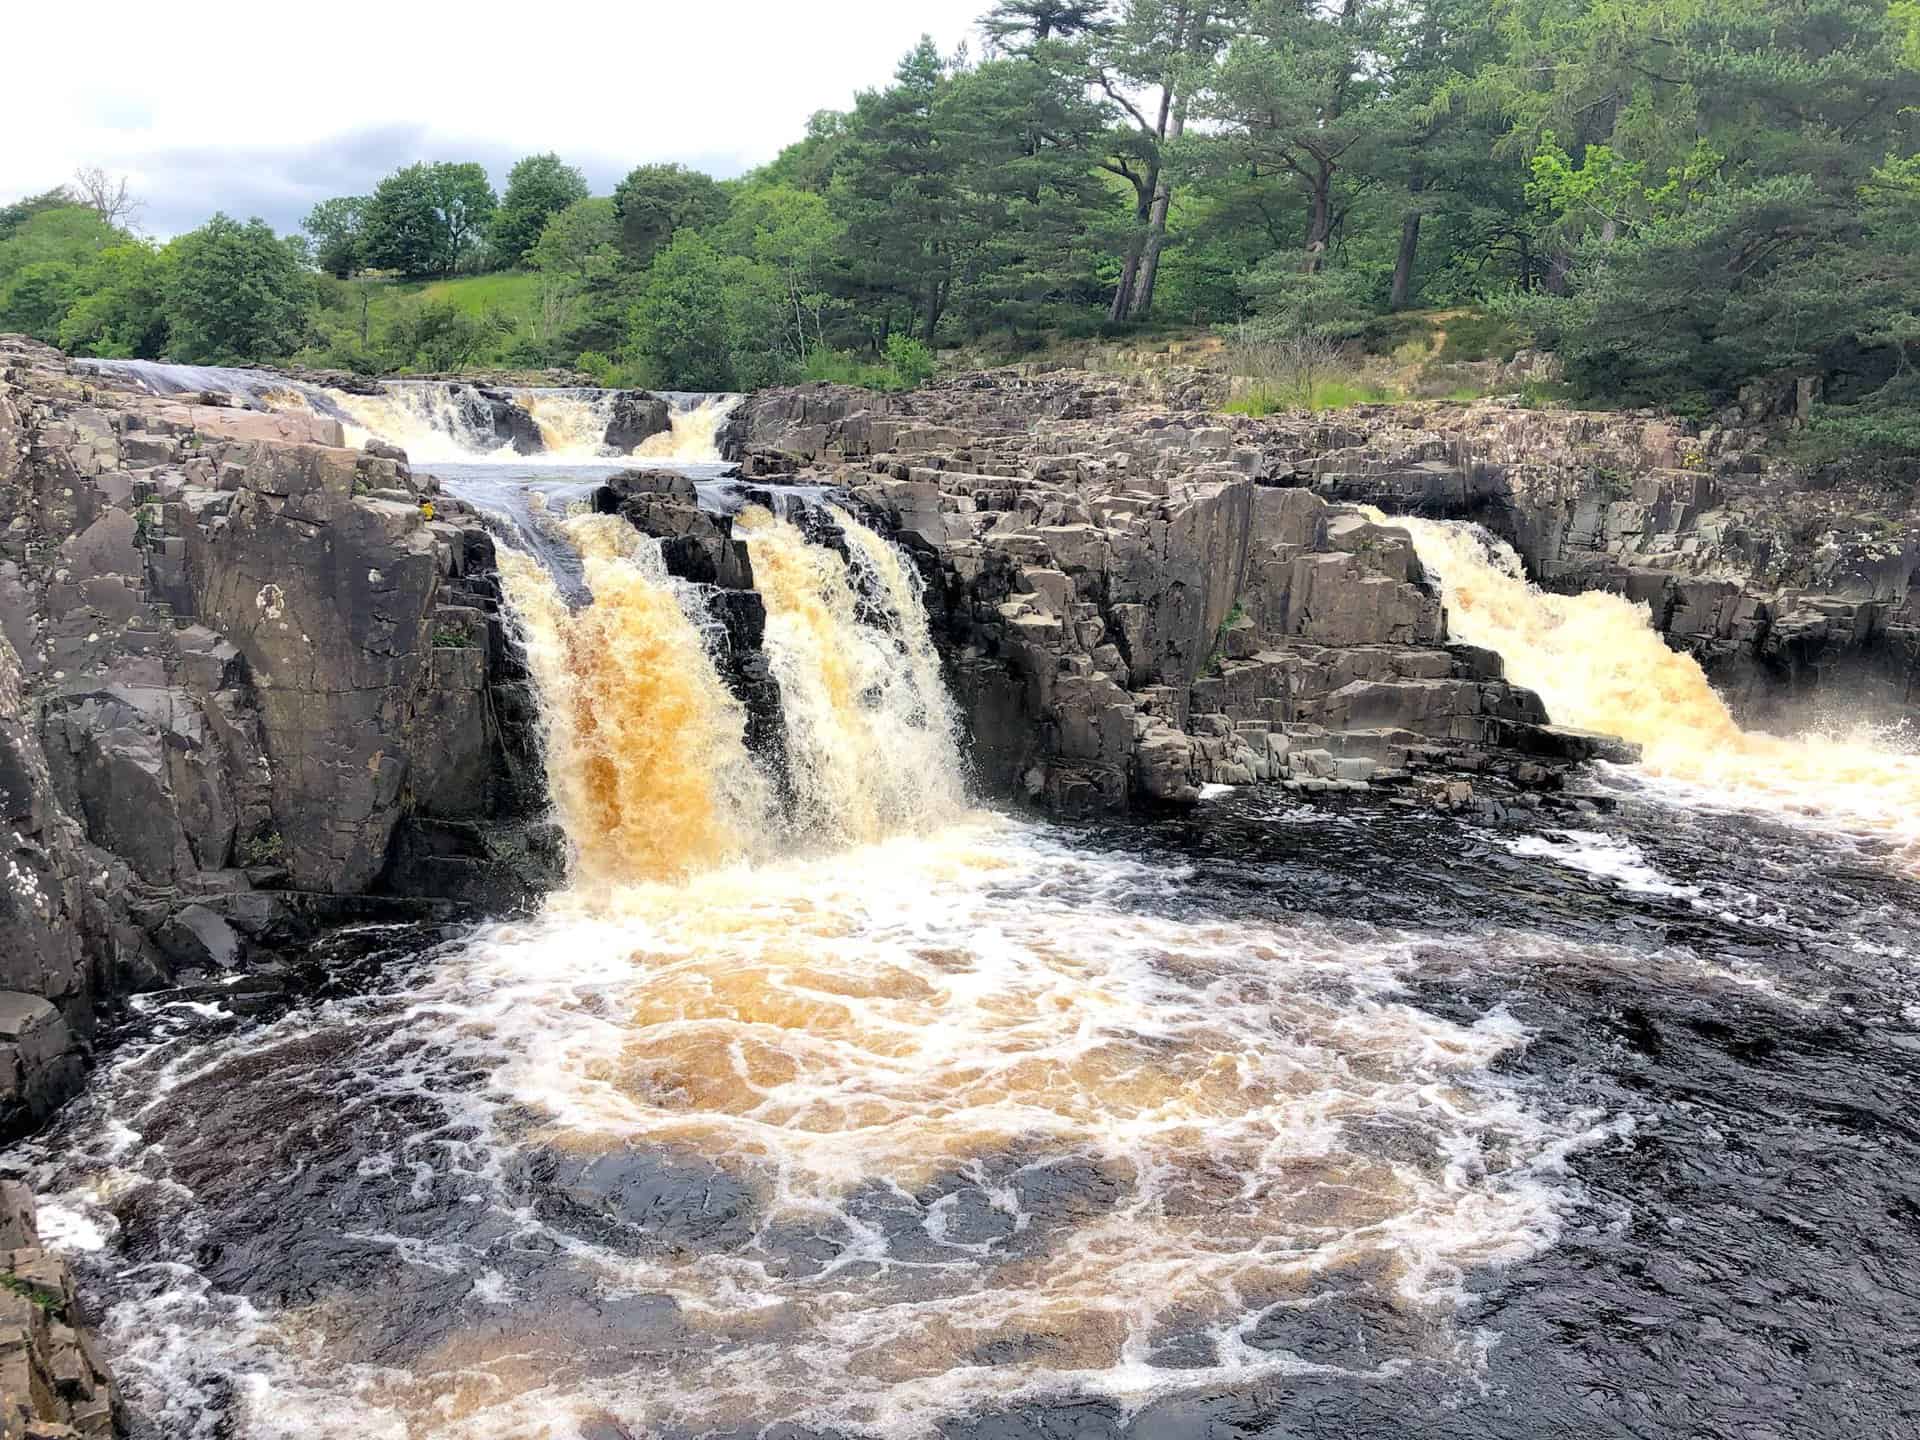 Low Force presents a series of picturesque waterfalls on the River Tees, located approximately 3½ miles north-west of Middleton-in-Teesdale.